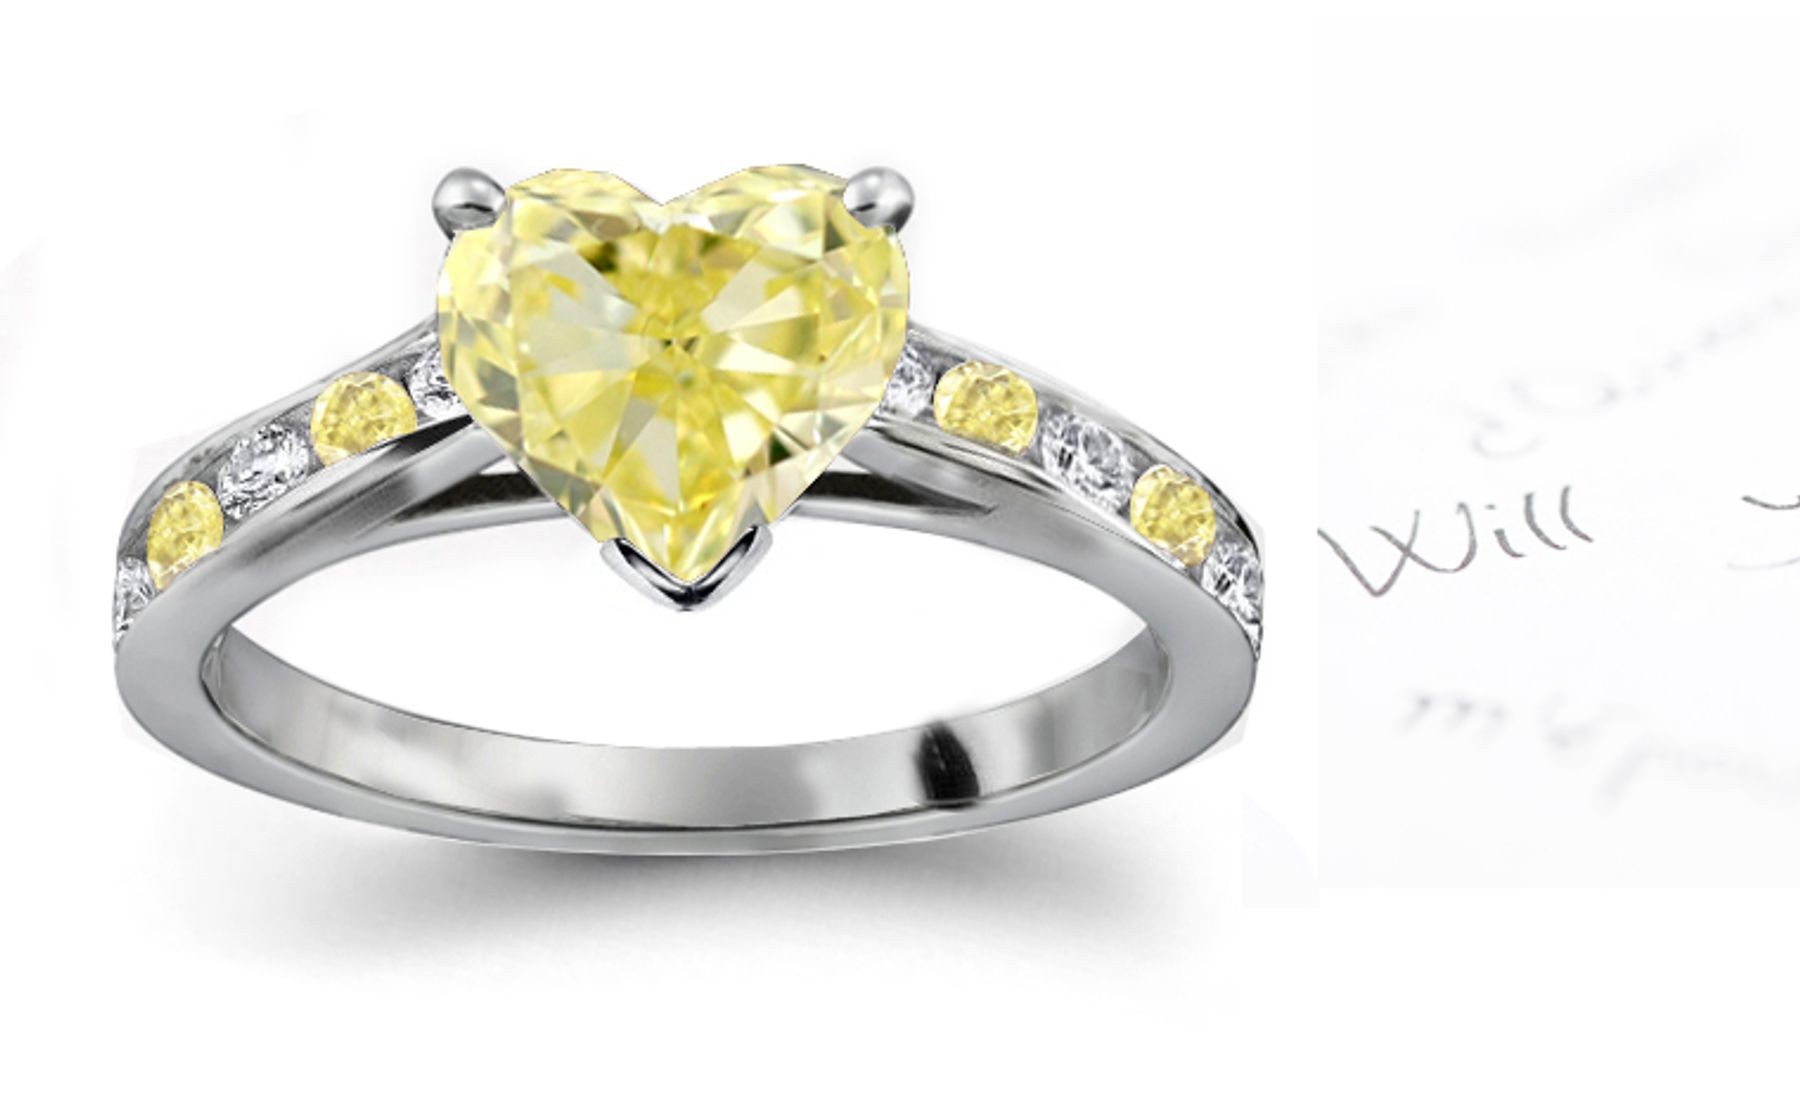 Shimmering Center Heart Yellow Diamond & Channel Set Contrasted Canary & White Diamonds Gold Engagement Ring